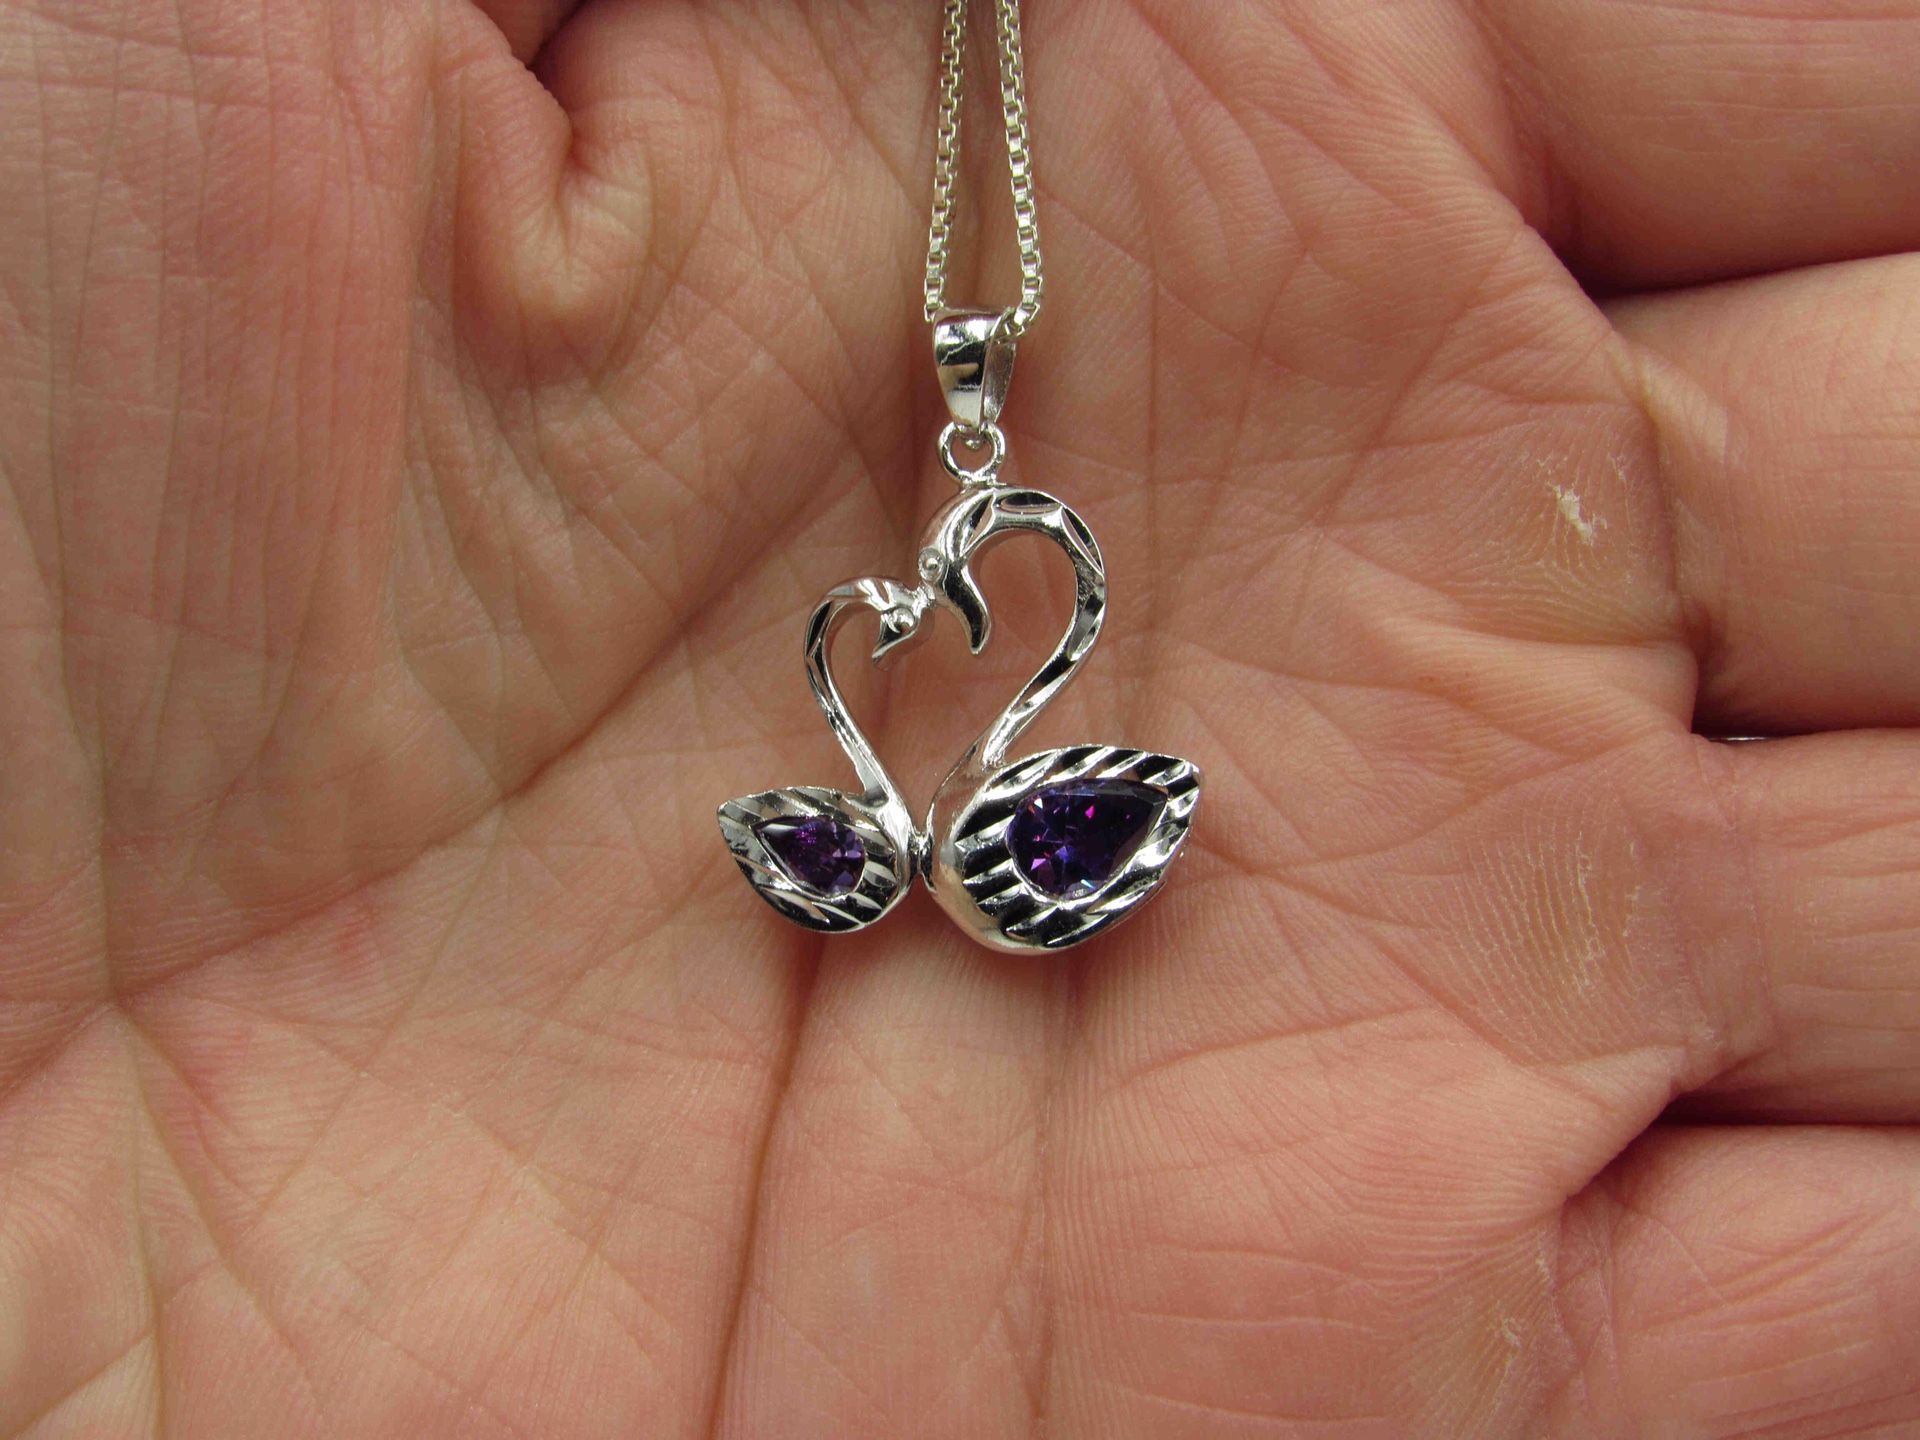 16" Sterling Silver Purple Glass Swan Mates Pendant Necklace Vintage Gift Idea Statement Minimalist Cute Everyday Promise Everyday Special